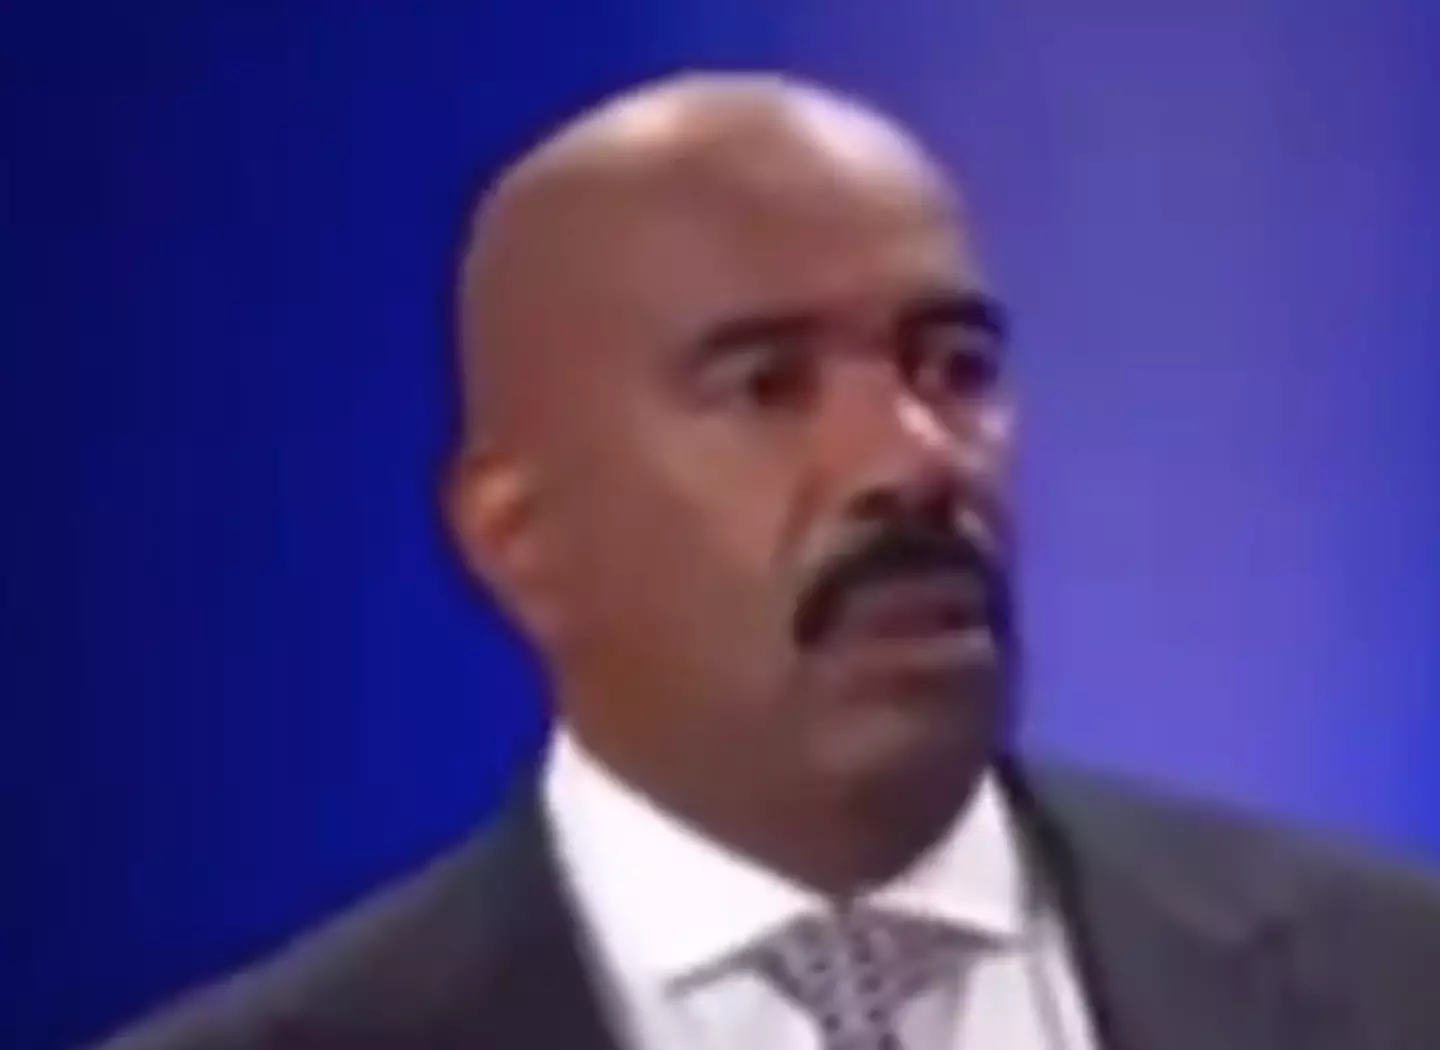 Steve Harvey was shocked by the answer.